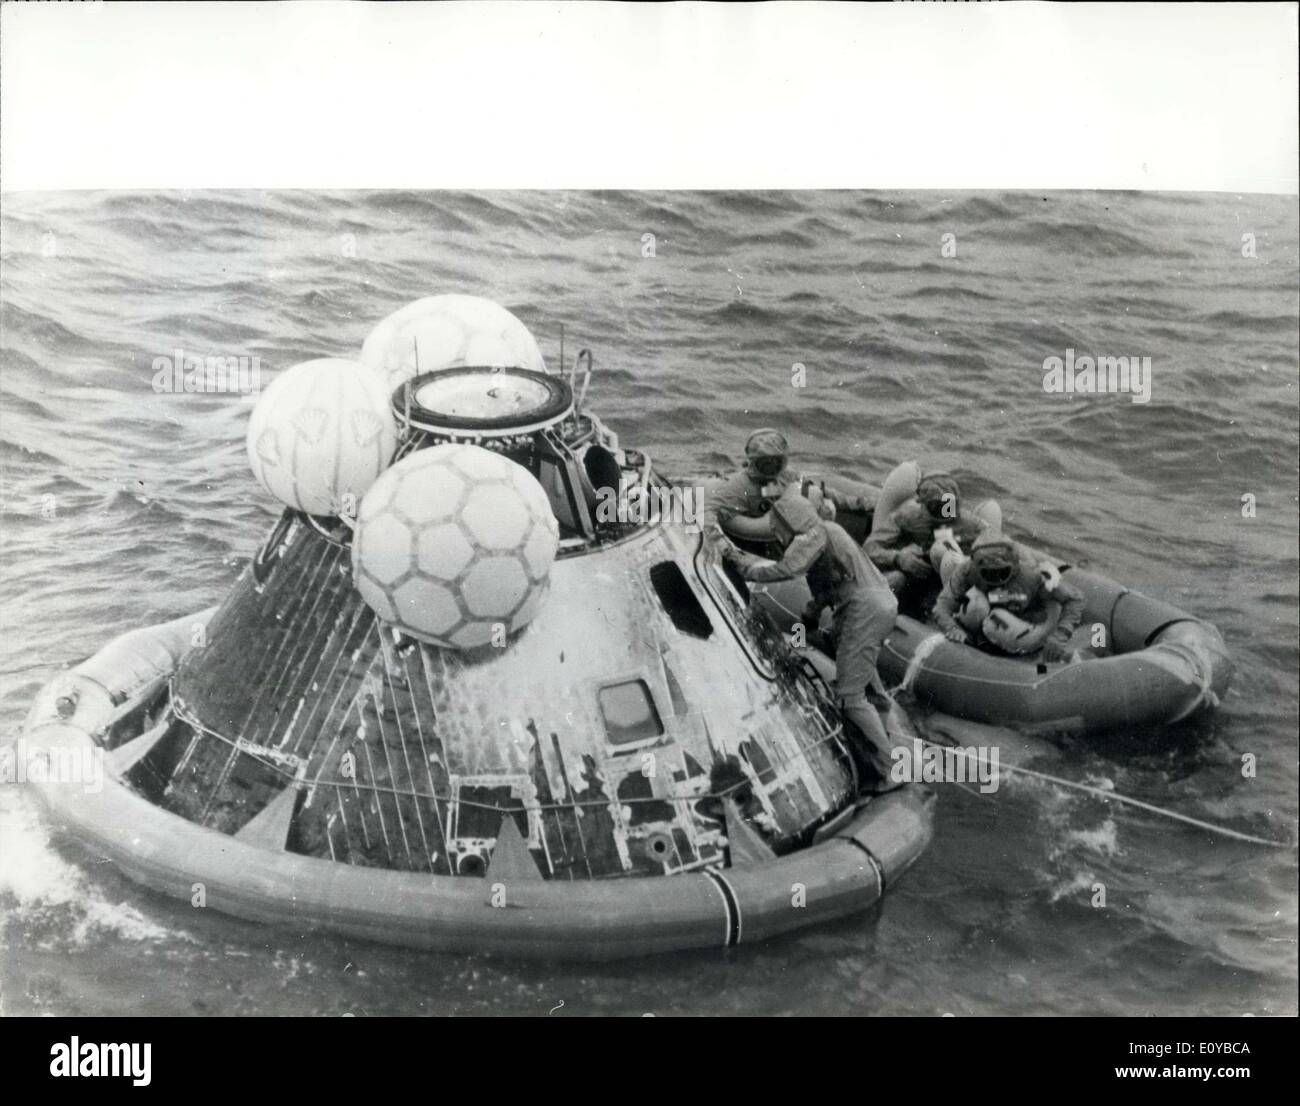 Jul. 29, 1969 - Apollo 11 Splashdown: The Apollo astronauts watch pararescuemen Lt. Clancey Hatleberg close their spacecraft's hatch following splashdown in the pacific ocean on July 24th,1969. 900 niles southwest of Hawail, Astronauts Neil Armstrong, Michael Collins and Edwin Aldria were flown by helicopter to the USS Momot, prime recovery ship, where they entered their Mobile Quarantine Facility. Armstrong and Aldrin conducted man's first exploration of the lunar surface. (The three inflated bags repositioned the spacecraft upright after it had turned over after splashing down. Stock Photo